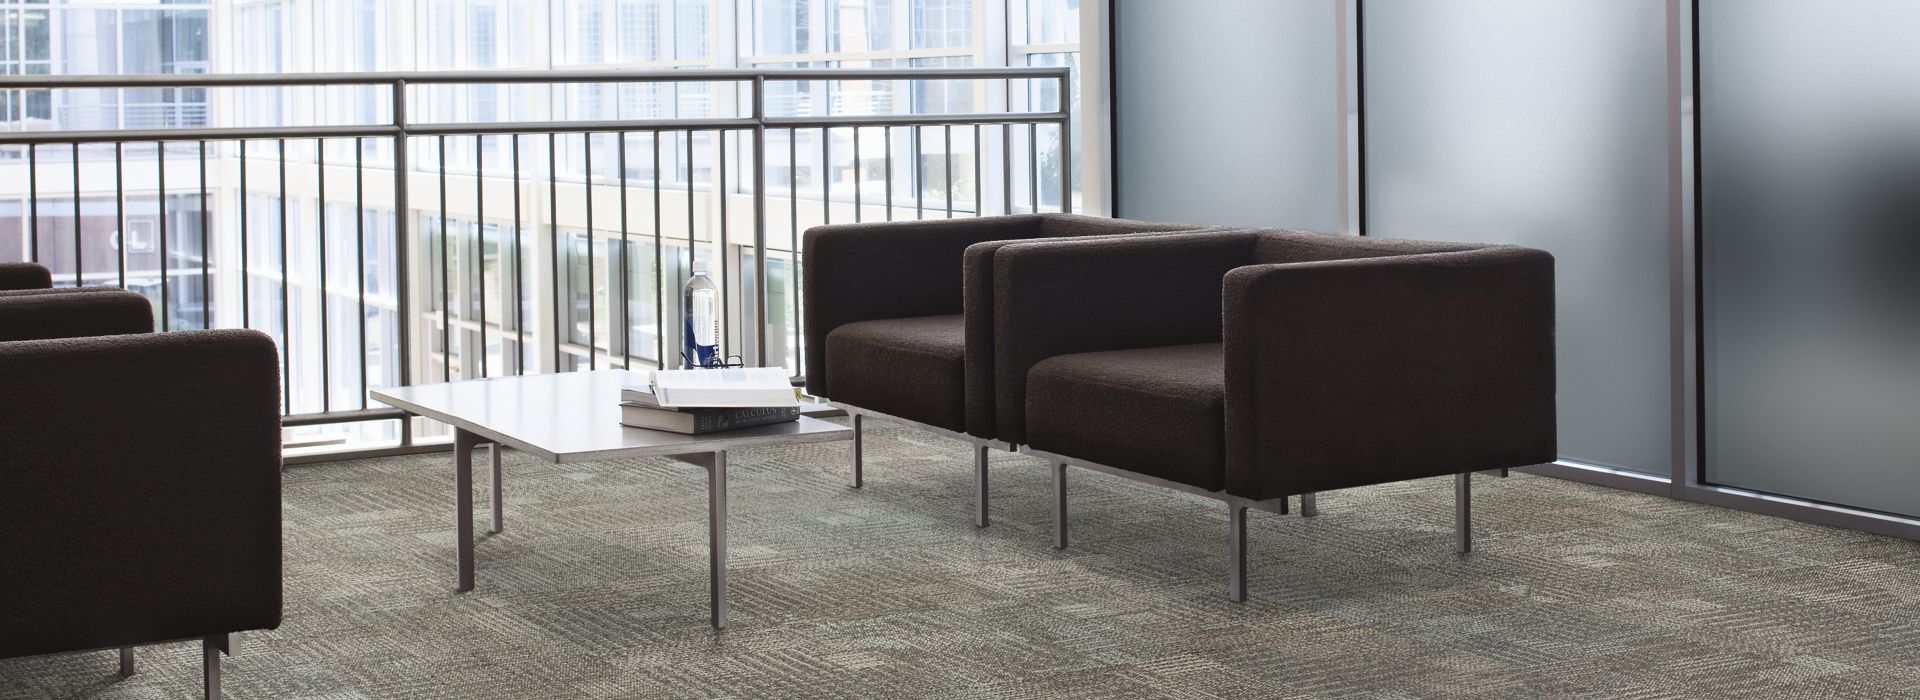 Interface Work carpet tile in lobby setting with couch and chairs